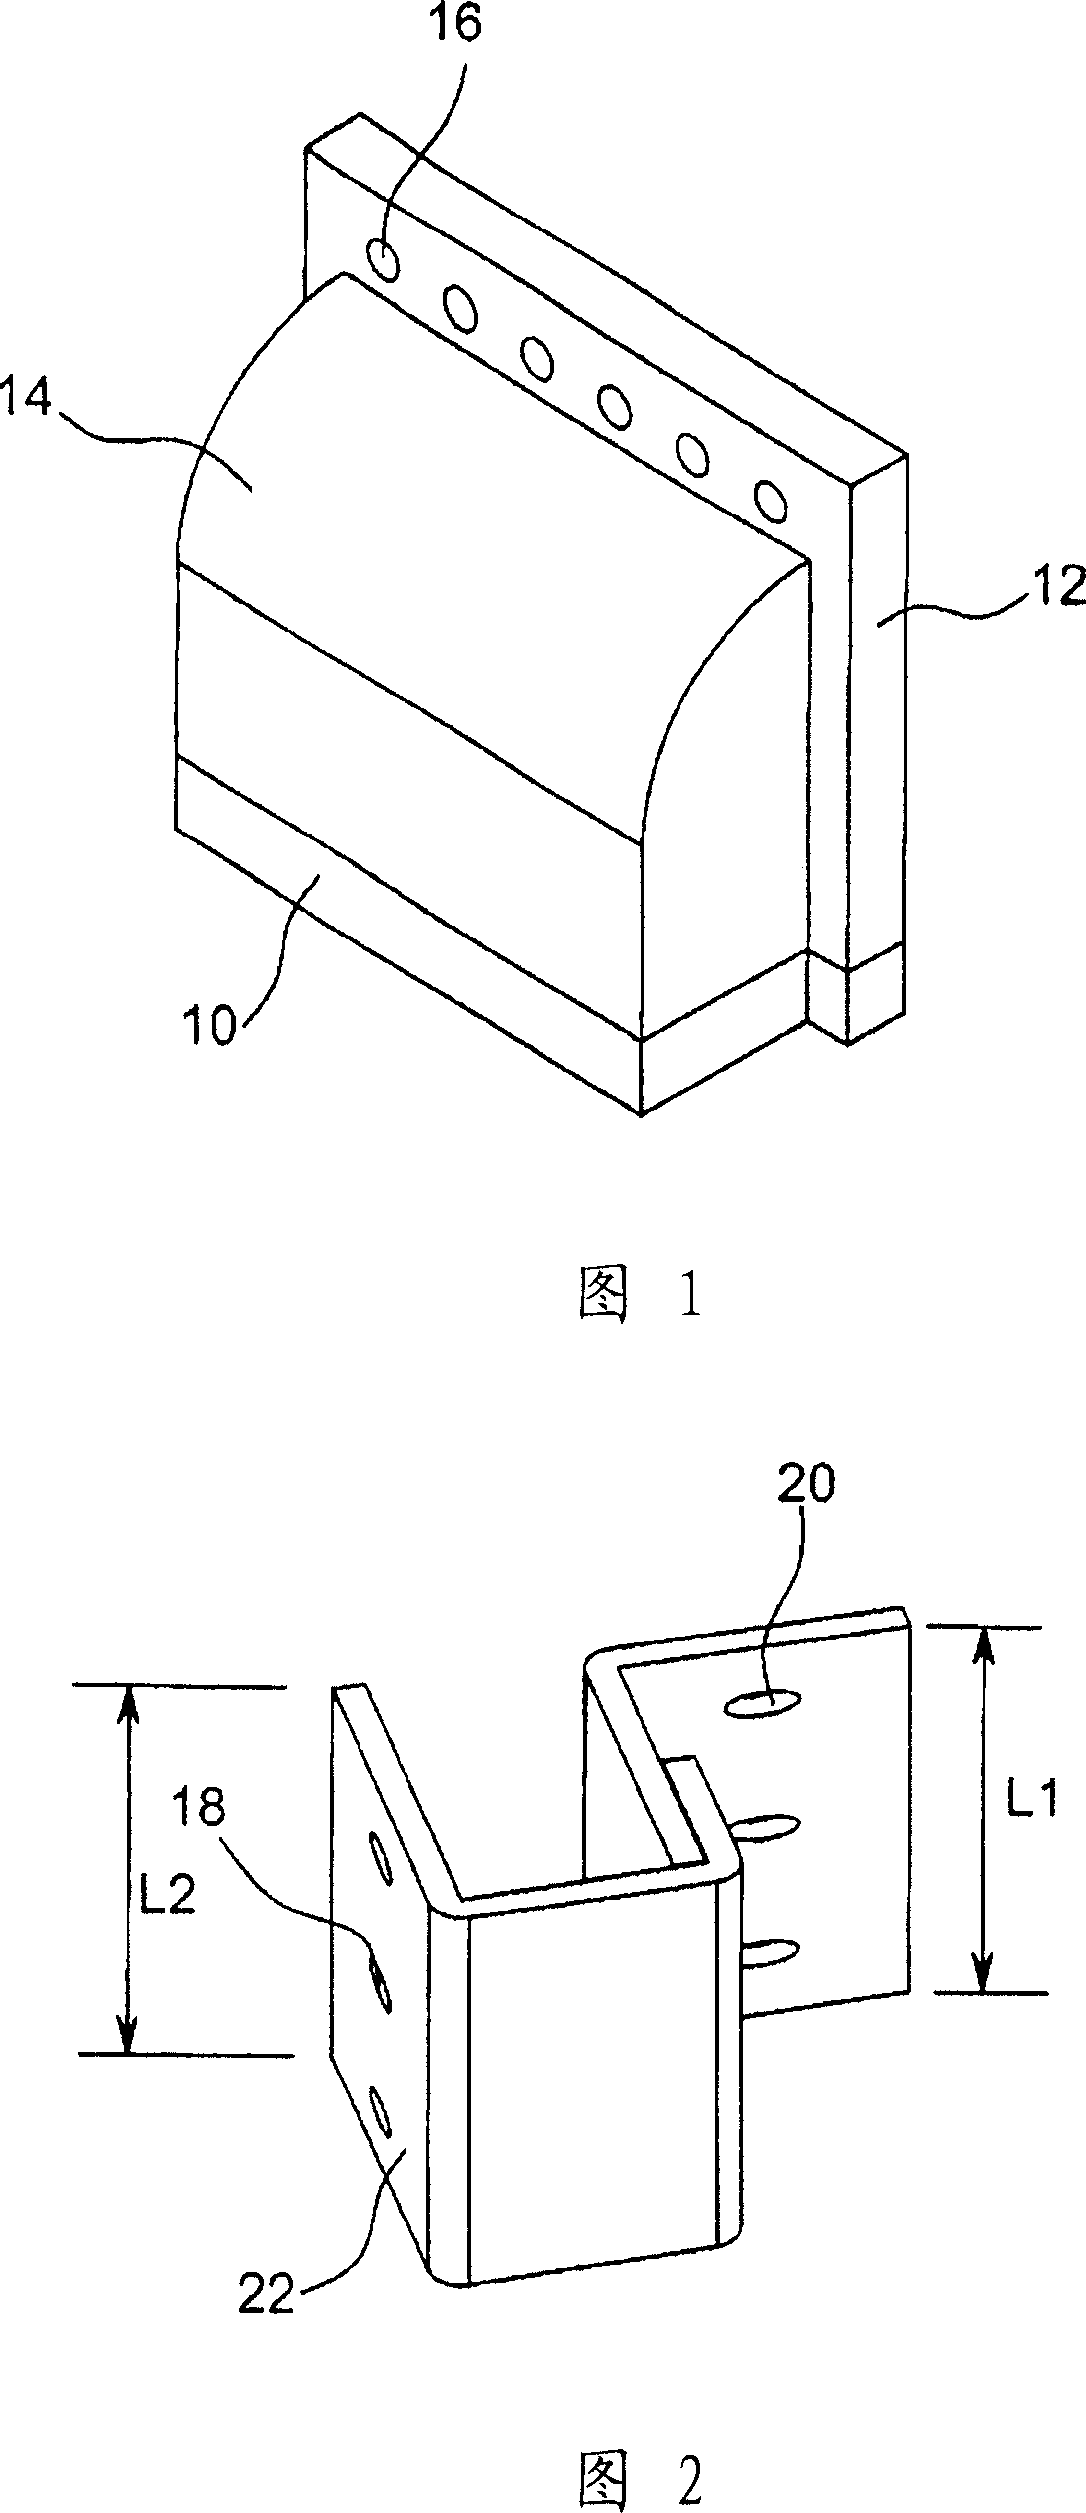 Rear projection TV and electronic device